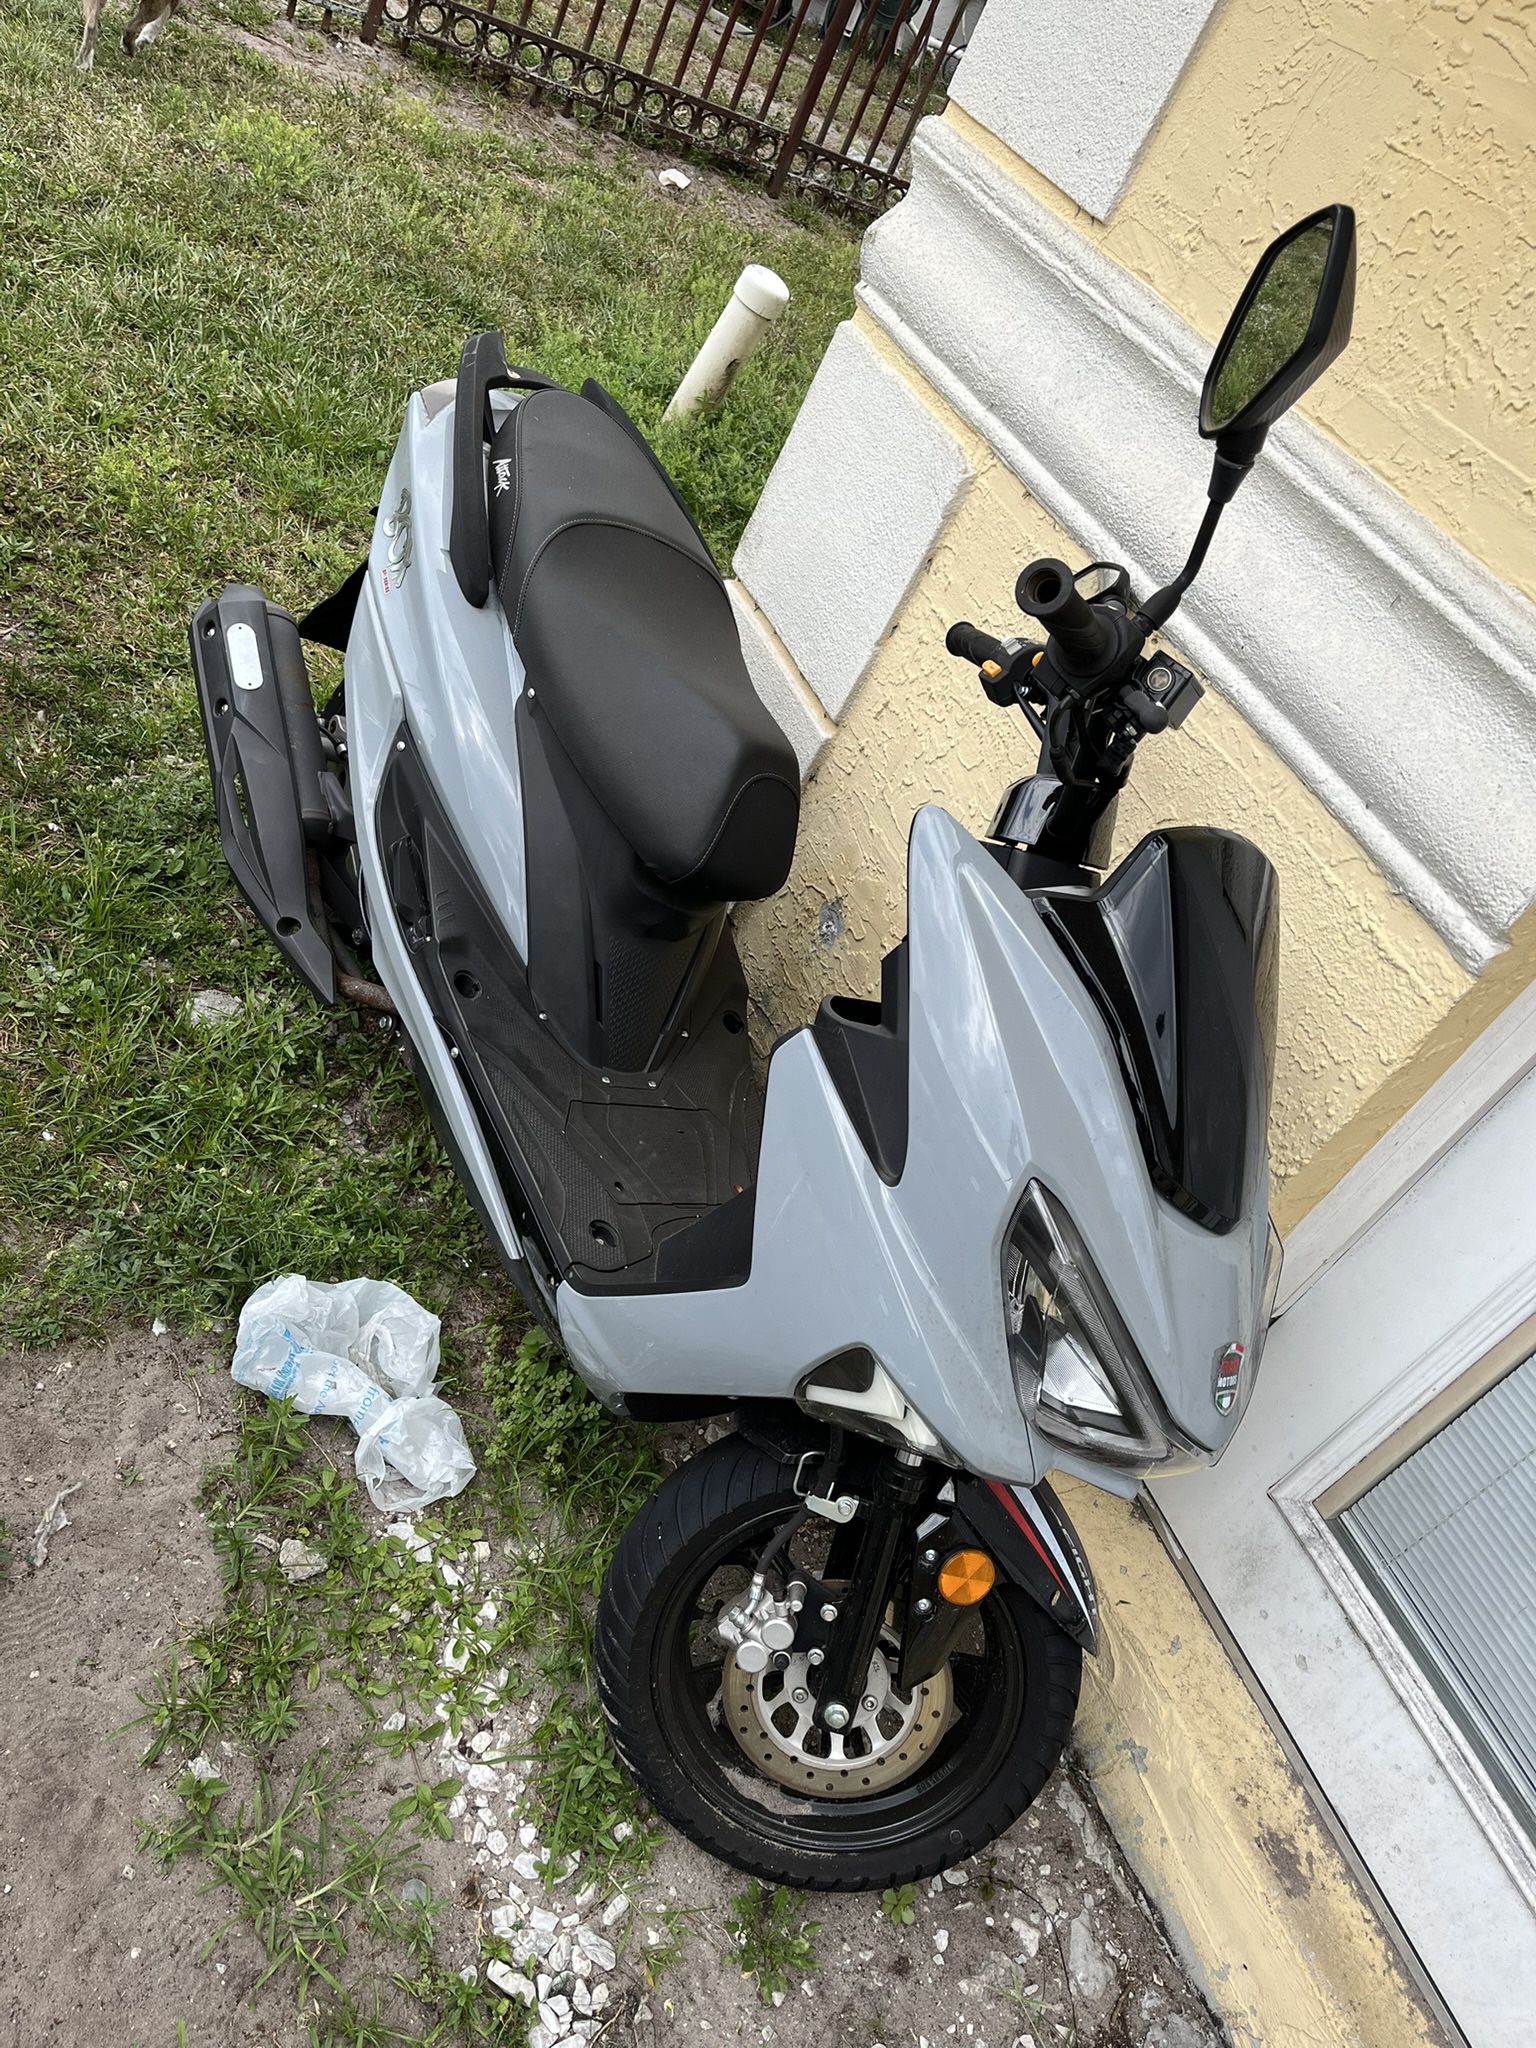 2 Used Scooters For Sale 1 200cc And One 150cc  $1800 For Both 